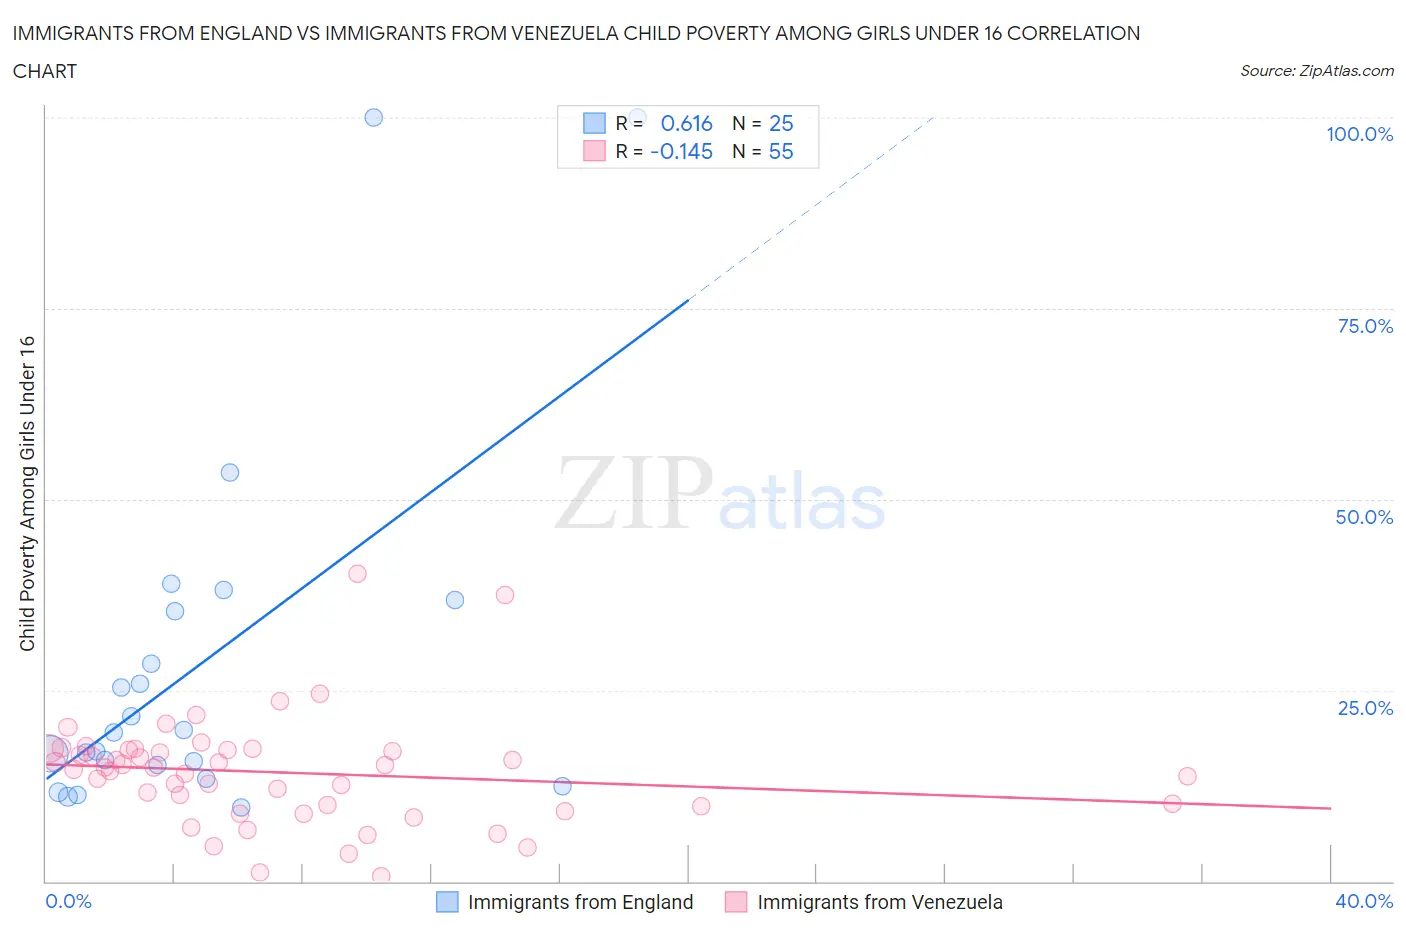 Immigrants from England vs Immigrants from Venezuela Child Poverty Among Girls Under 16